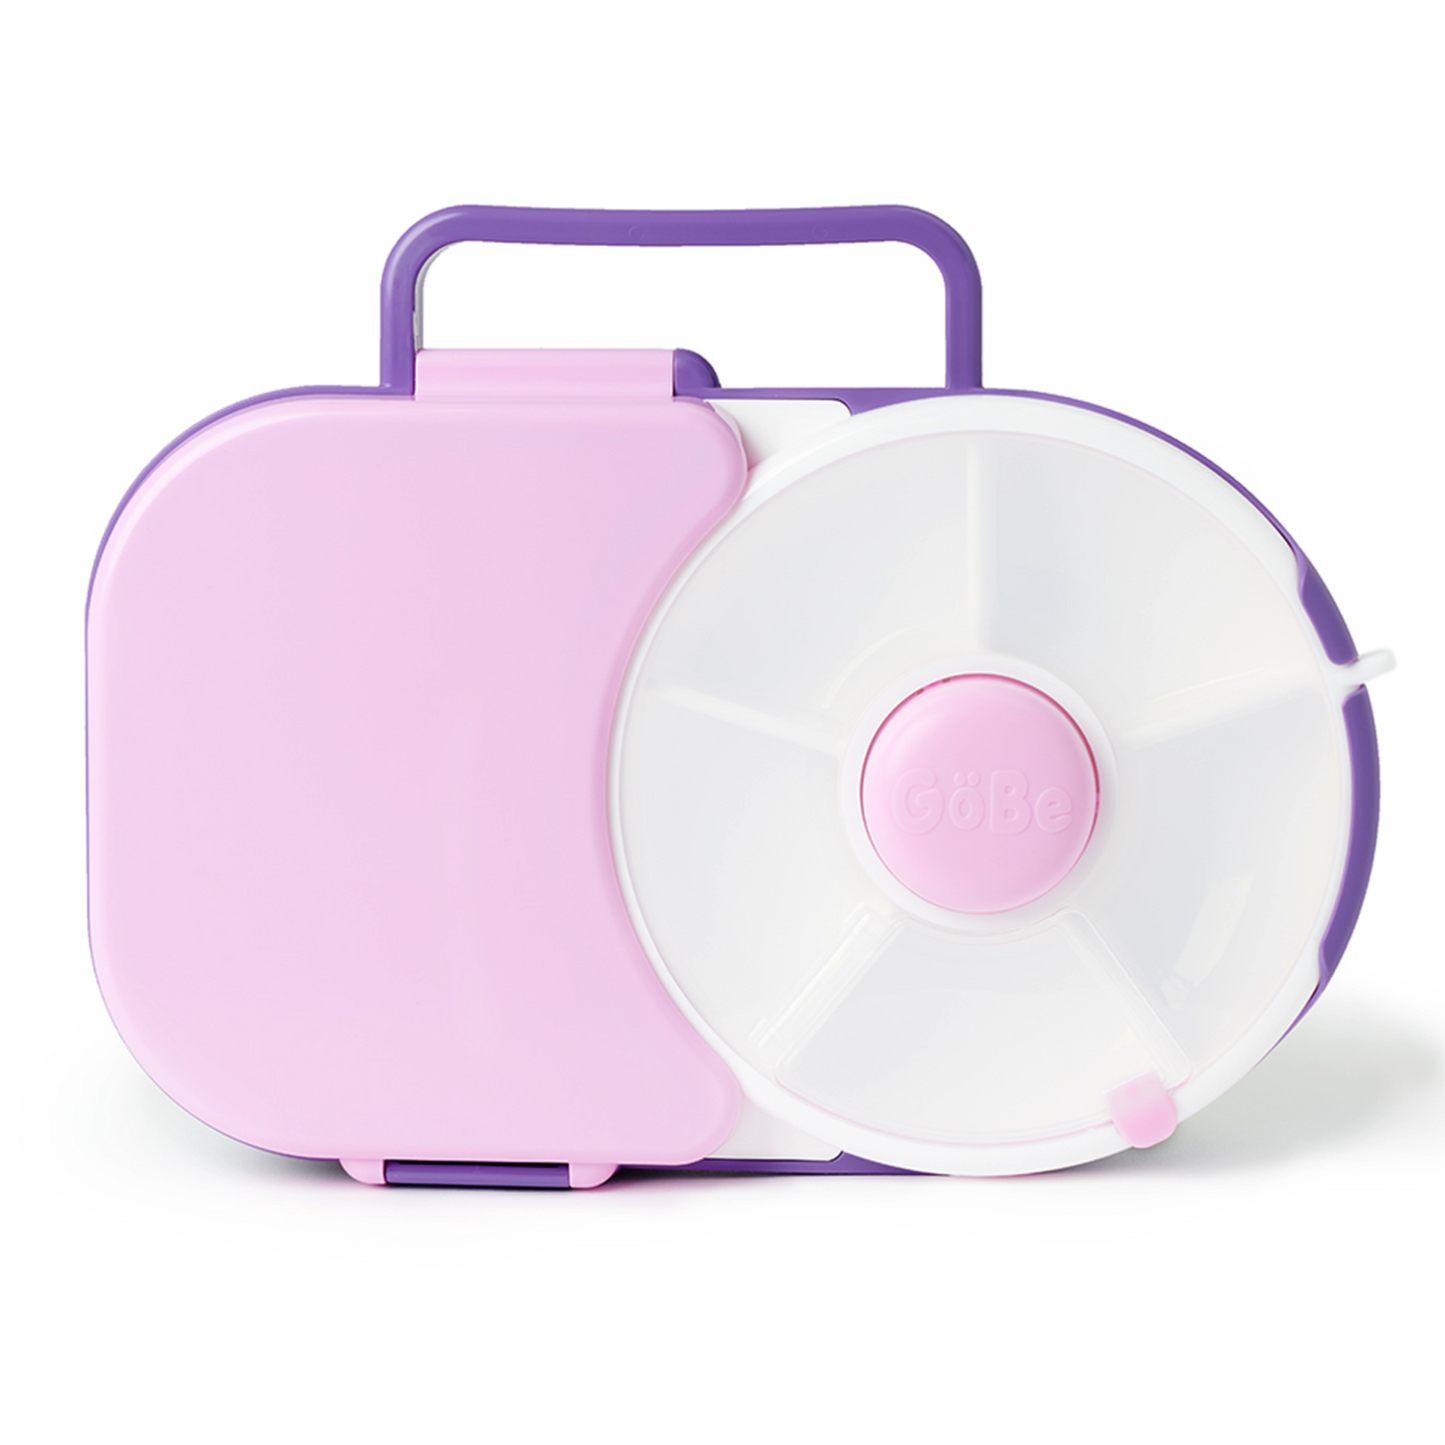 Gobe snack spinner and lunchbox combo in purple..